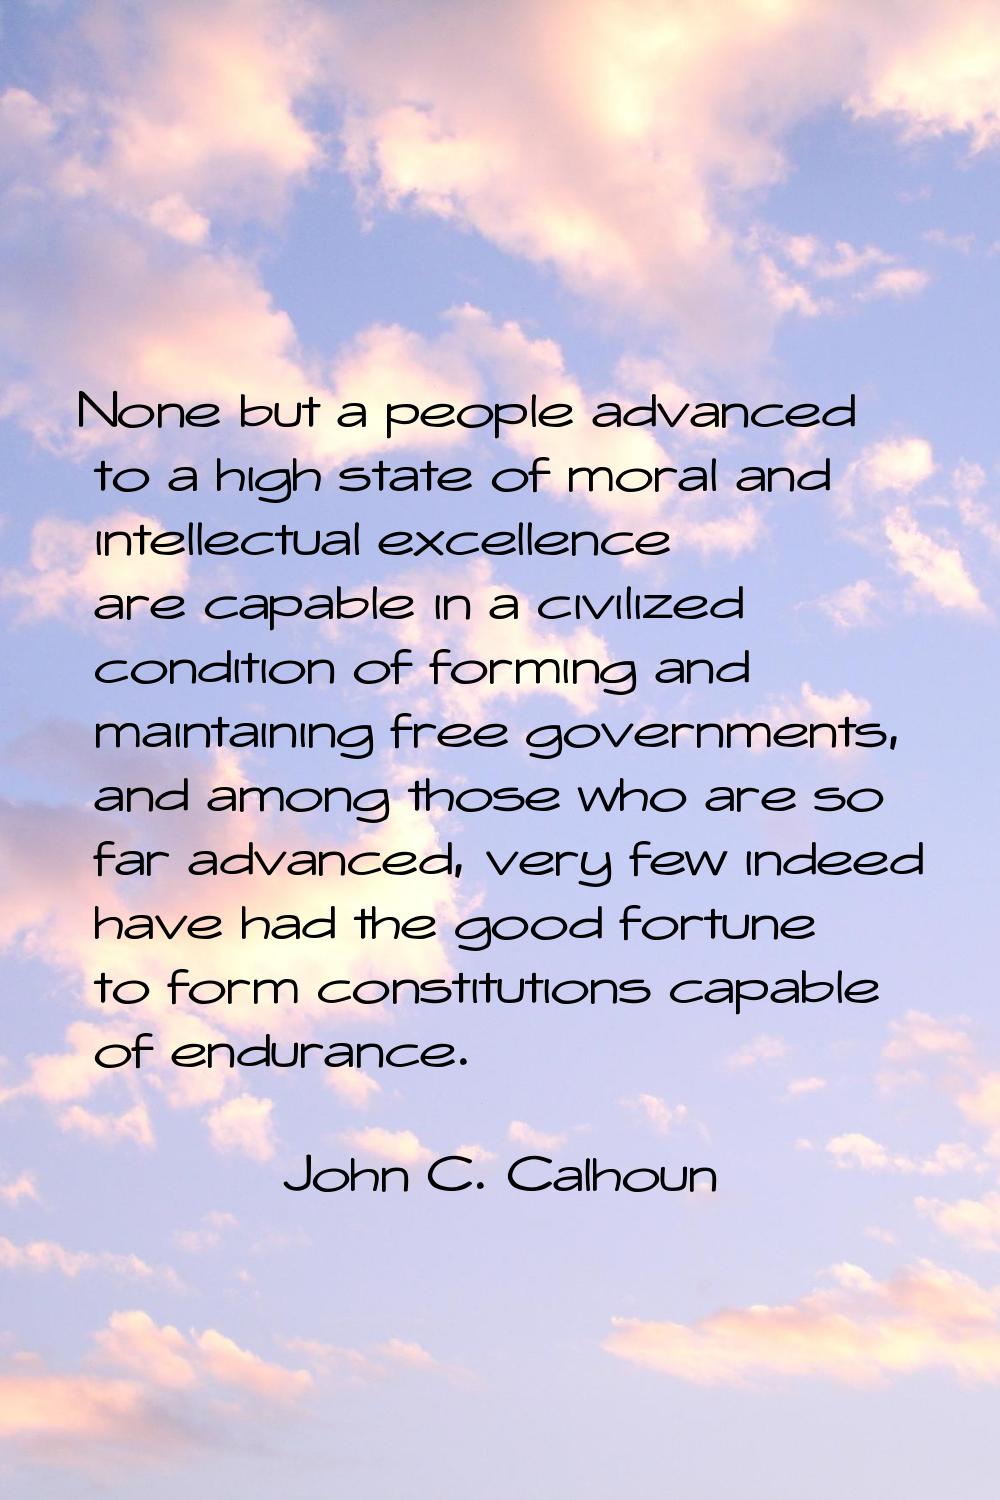 None but a people advanced to a high state of moral and intellectual excellence are capable in a ci